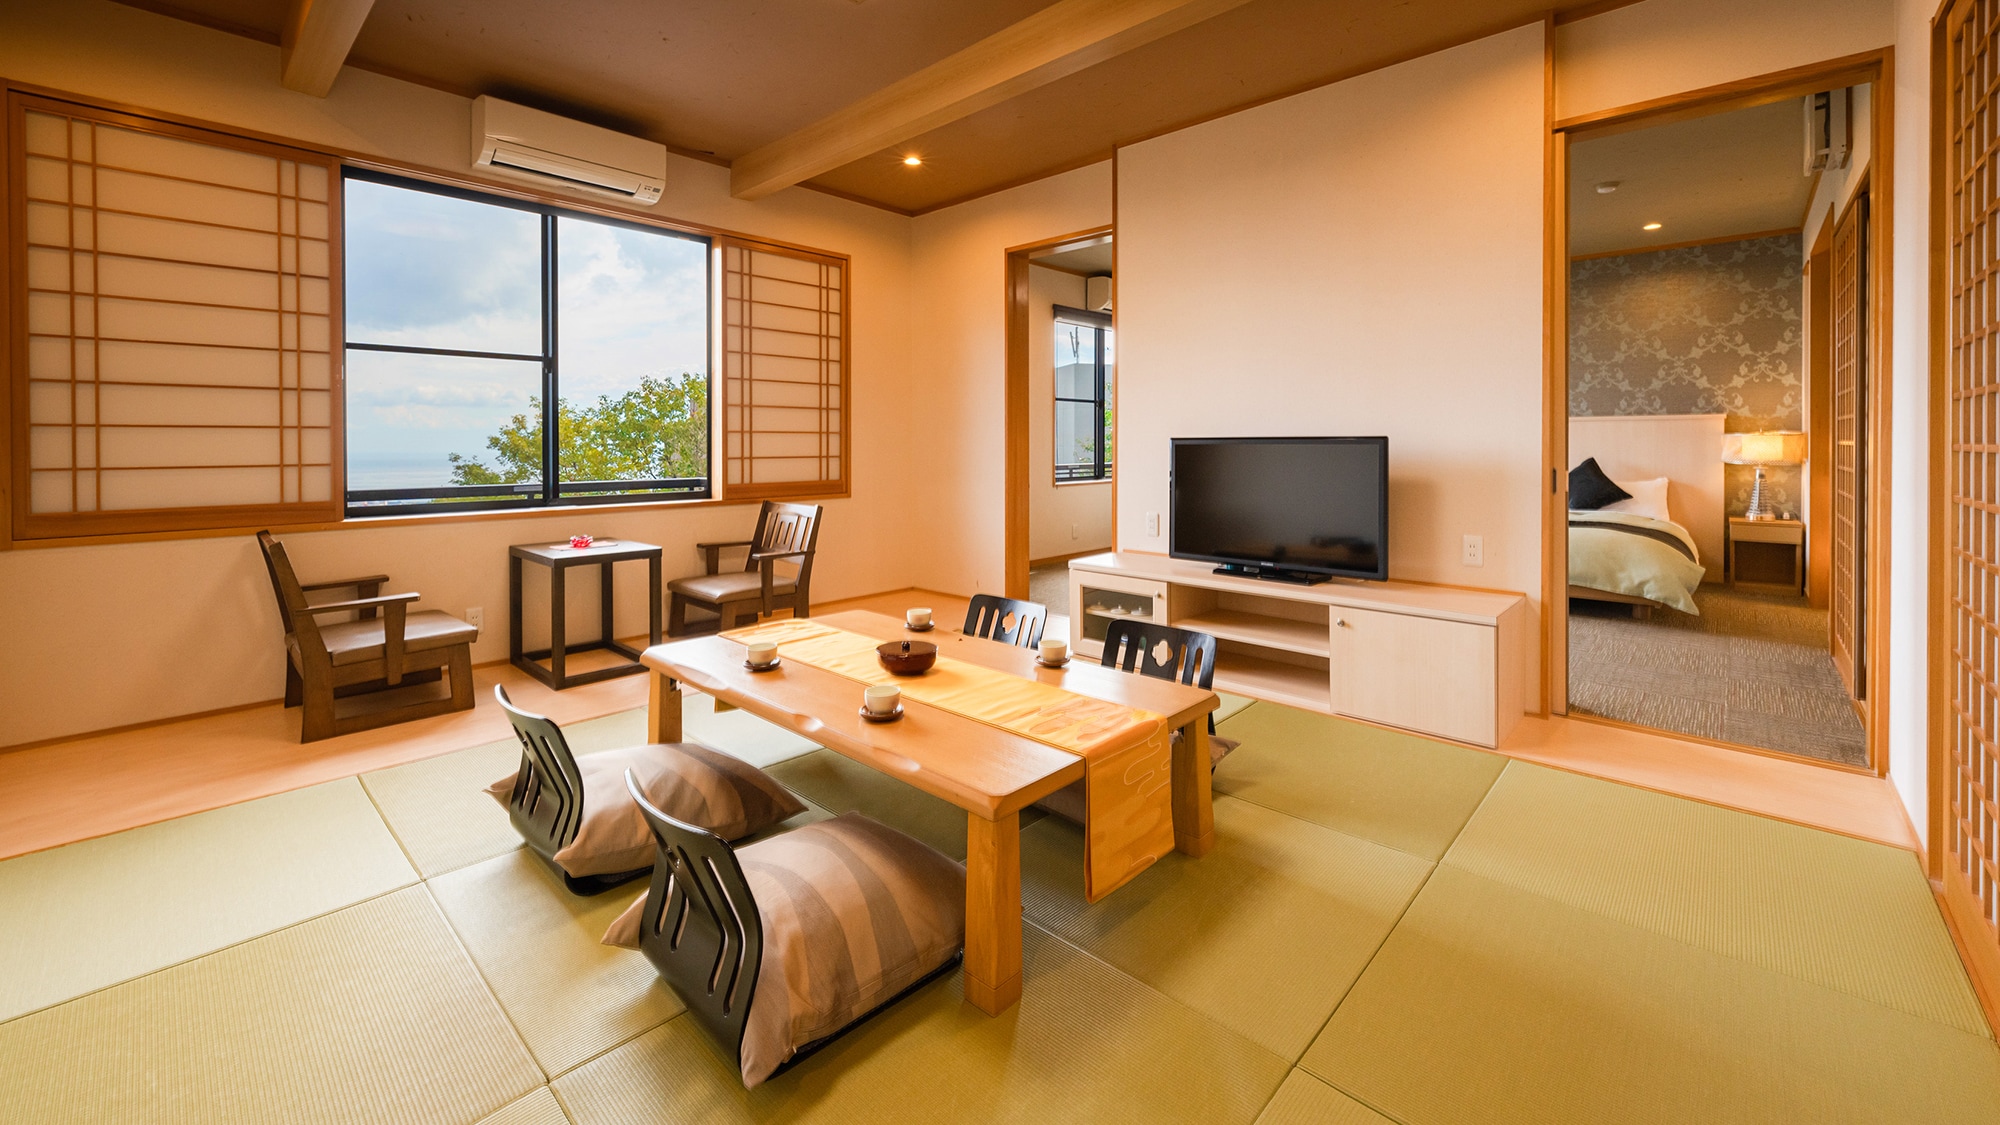 ◆ Oka no Sou ◇ Japanese-Western style room "Thistle" ◆ Between Japanese-style room and Western-style room. Recommended for group trips